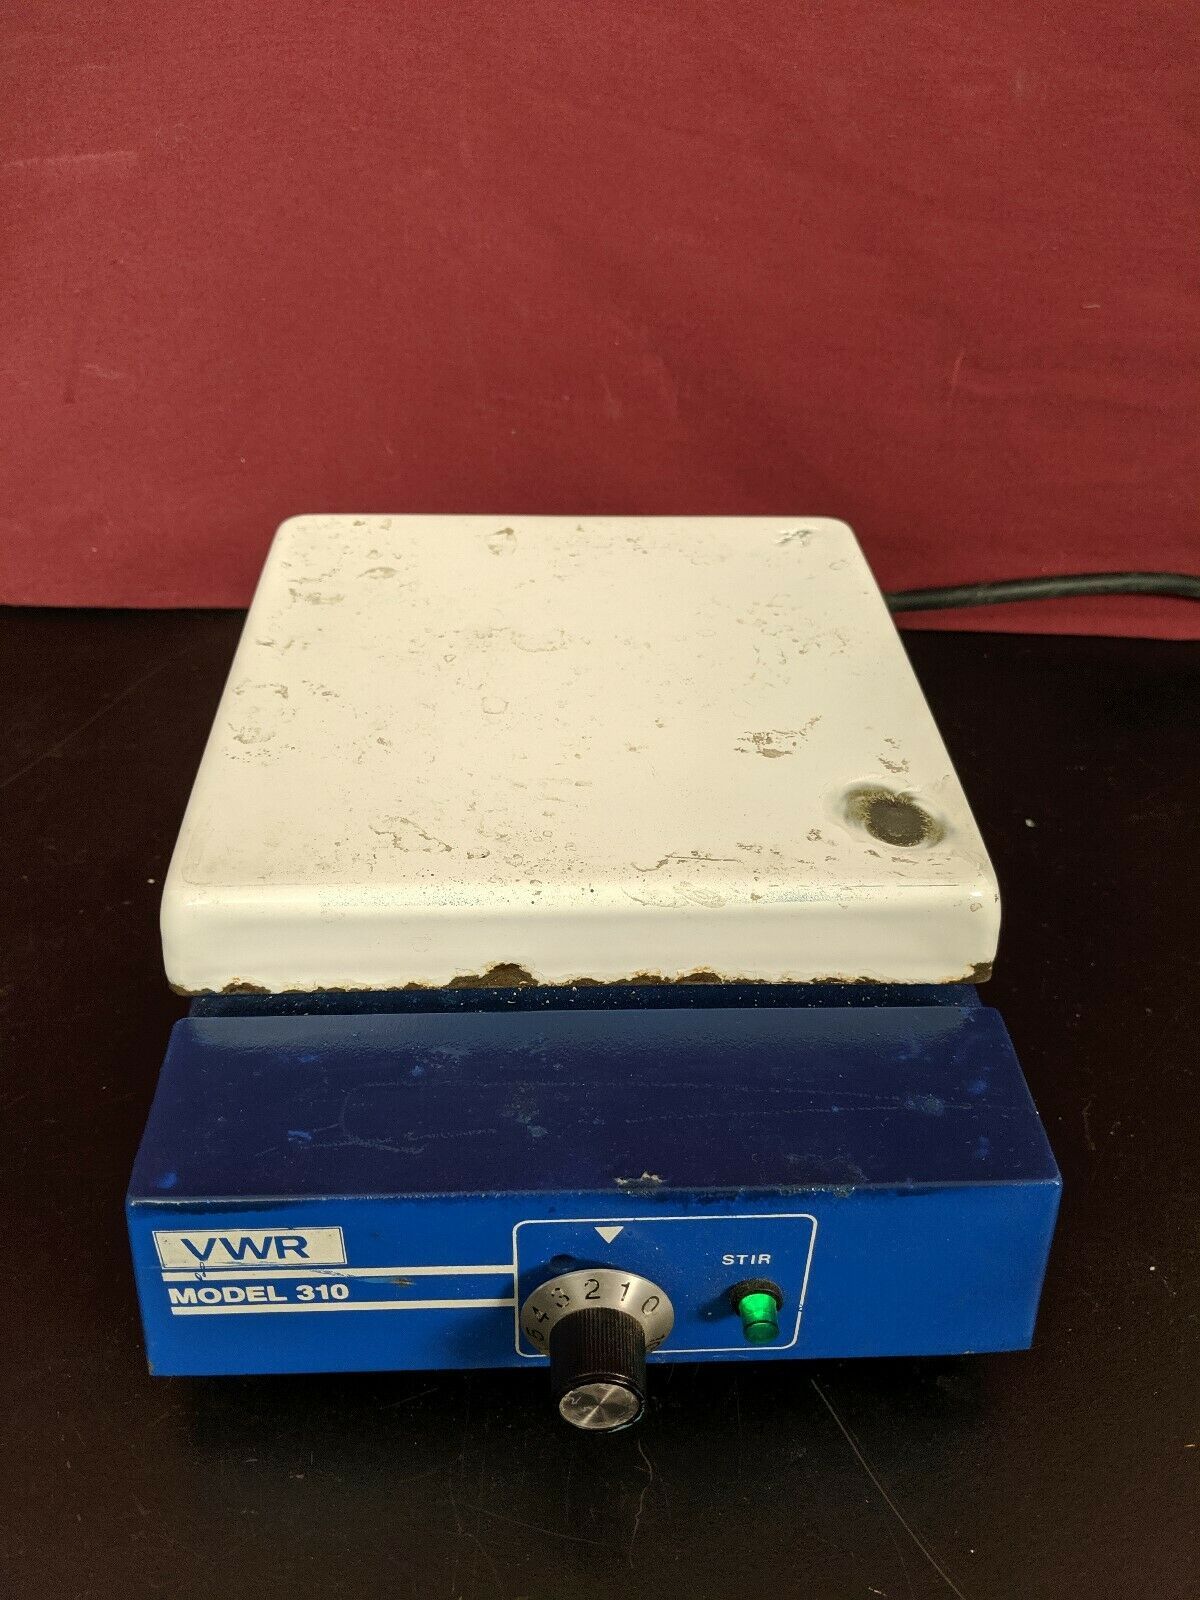 VWR Model 310 / Barnstead Thermolyne S35925 Magnetic Stirrer TESTED / GUARANTEED - $113.85